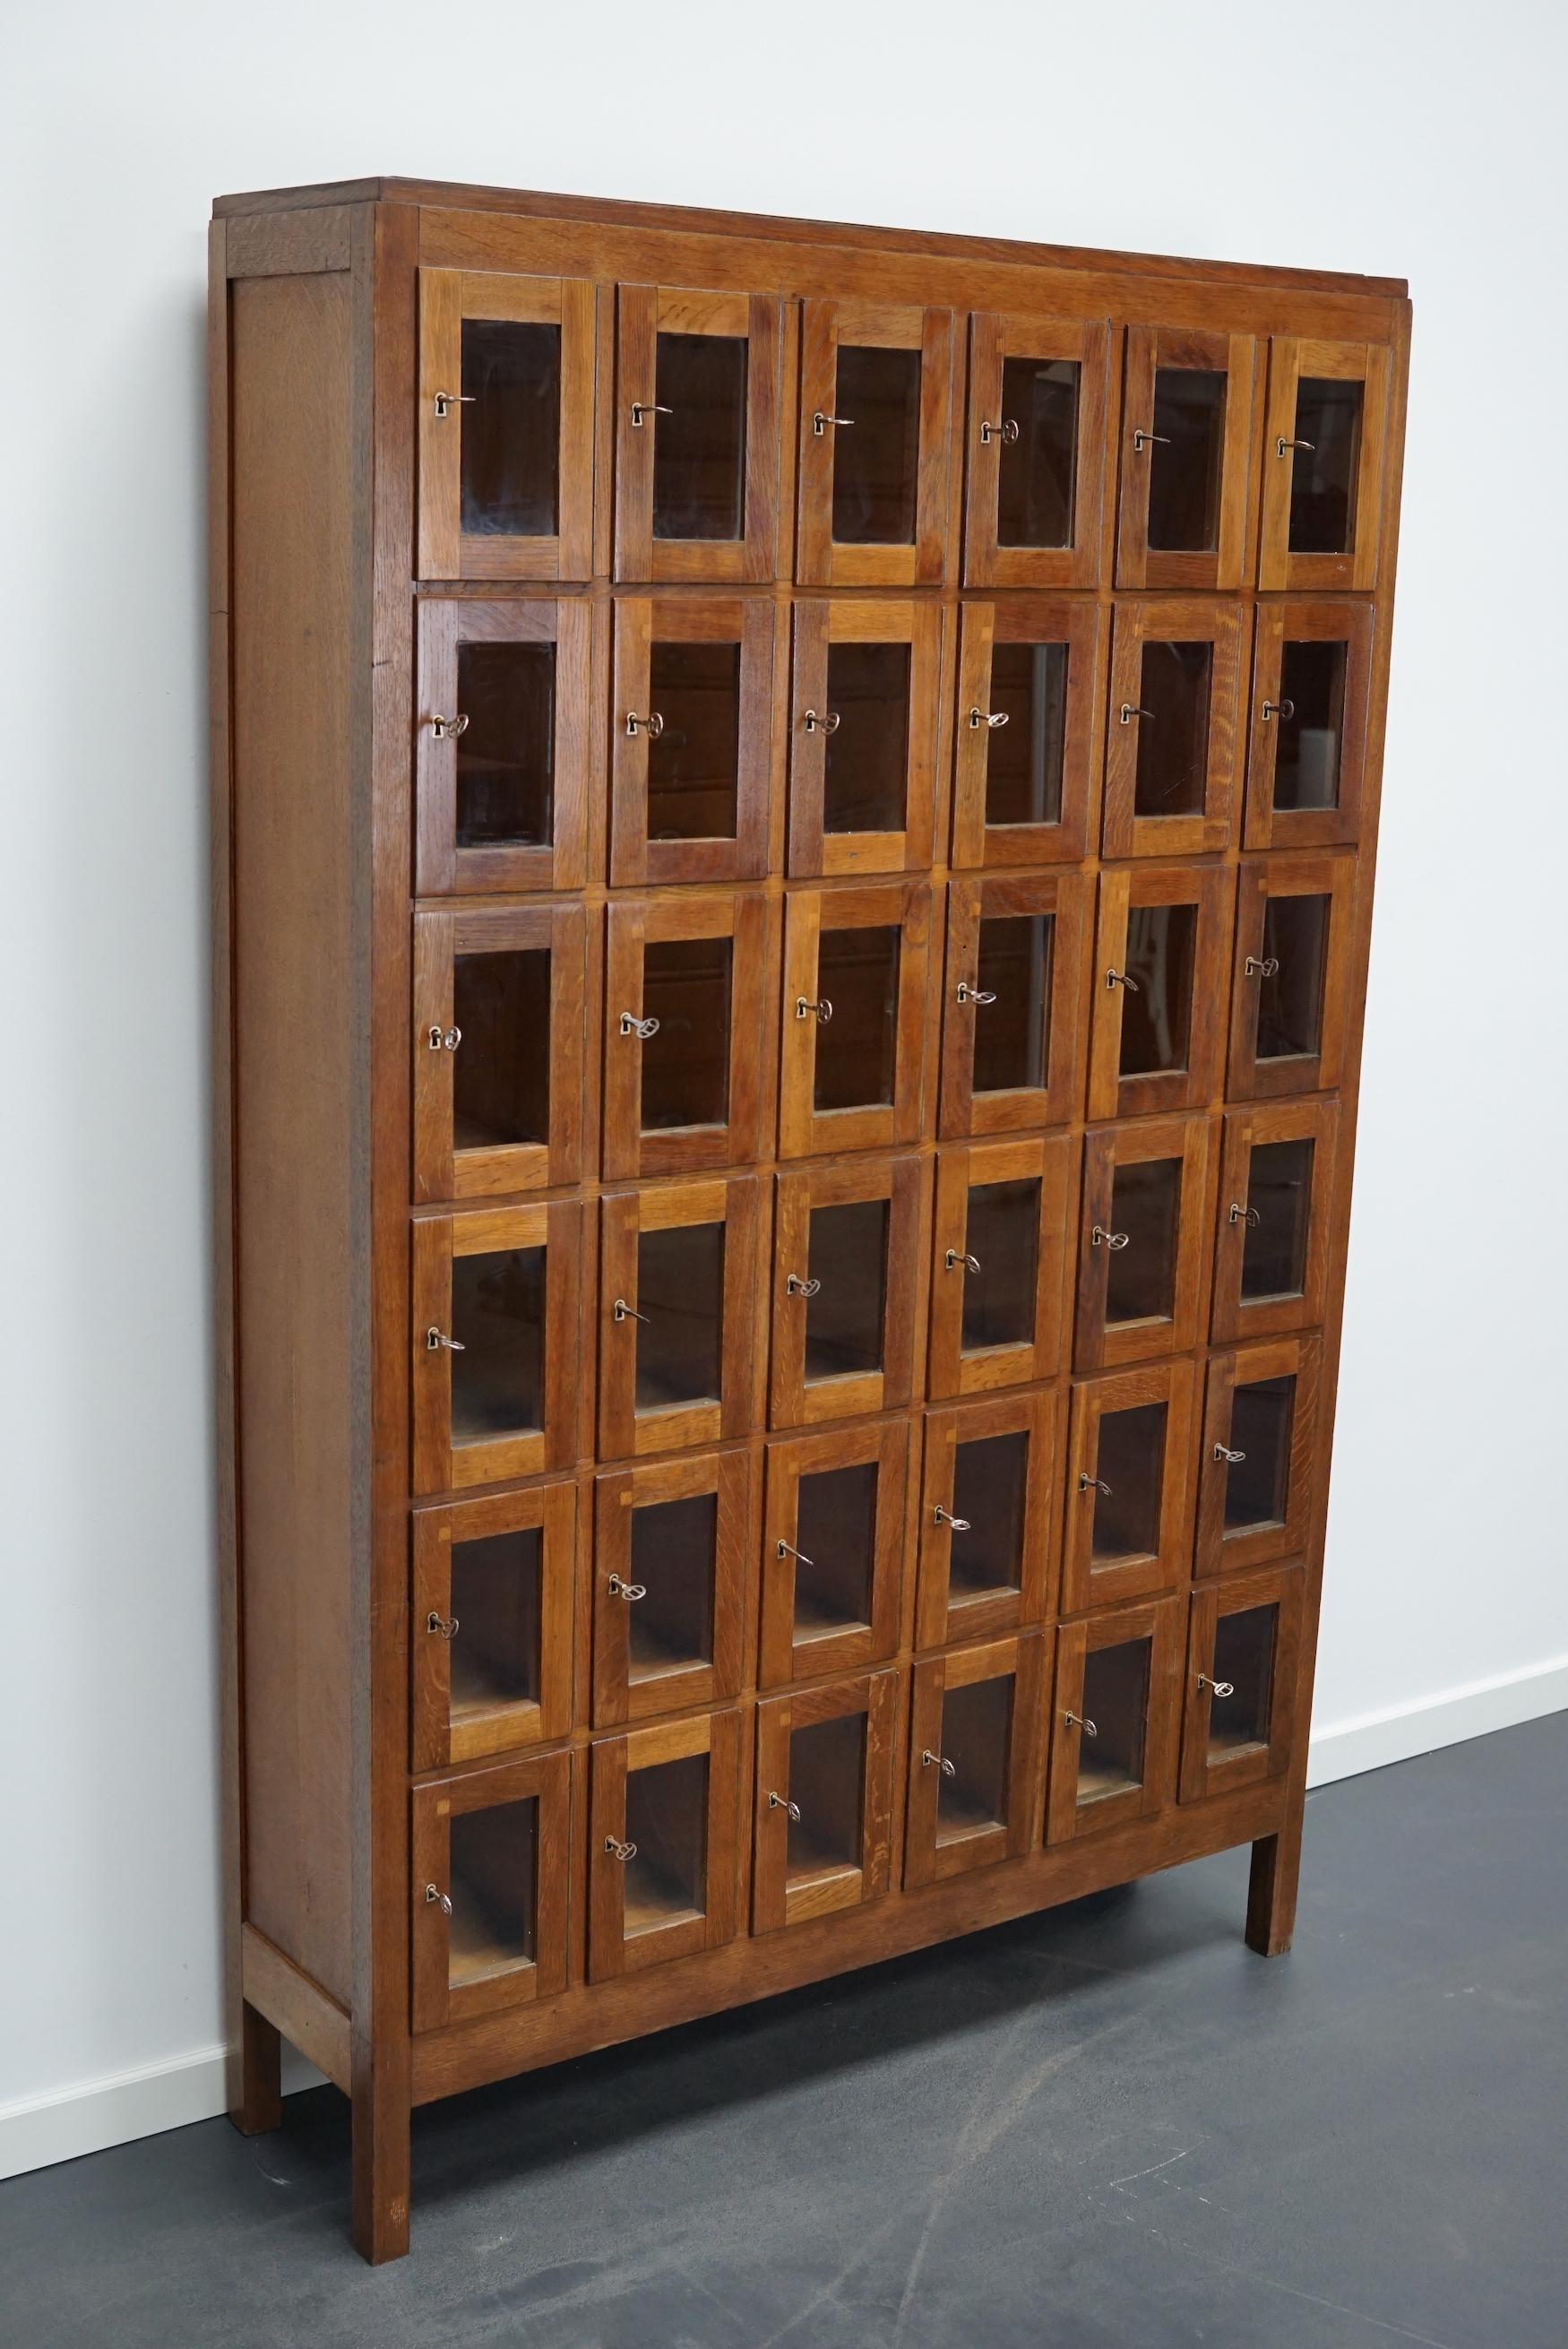 This vintage Dutch oak locker with glass doors was made around the 1930s in the Netherlands. It was used on an army base to store the headphones for the tank drivers and pilots during WW2. Every door has its own individual key. The interior